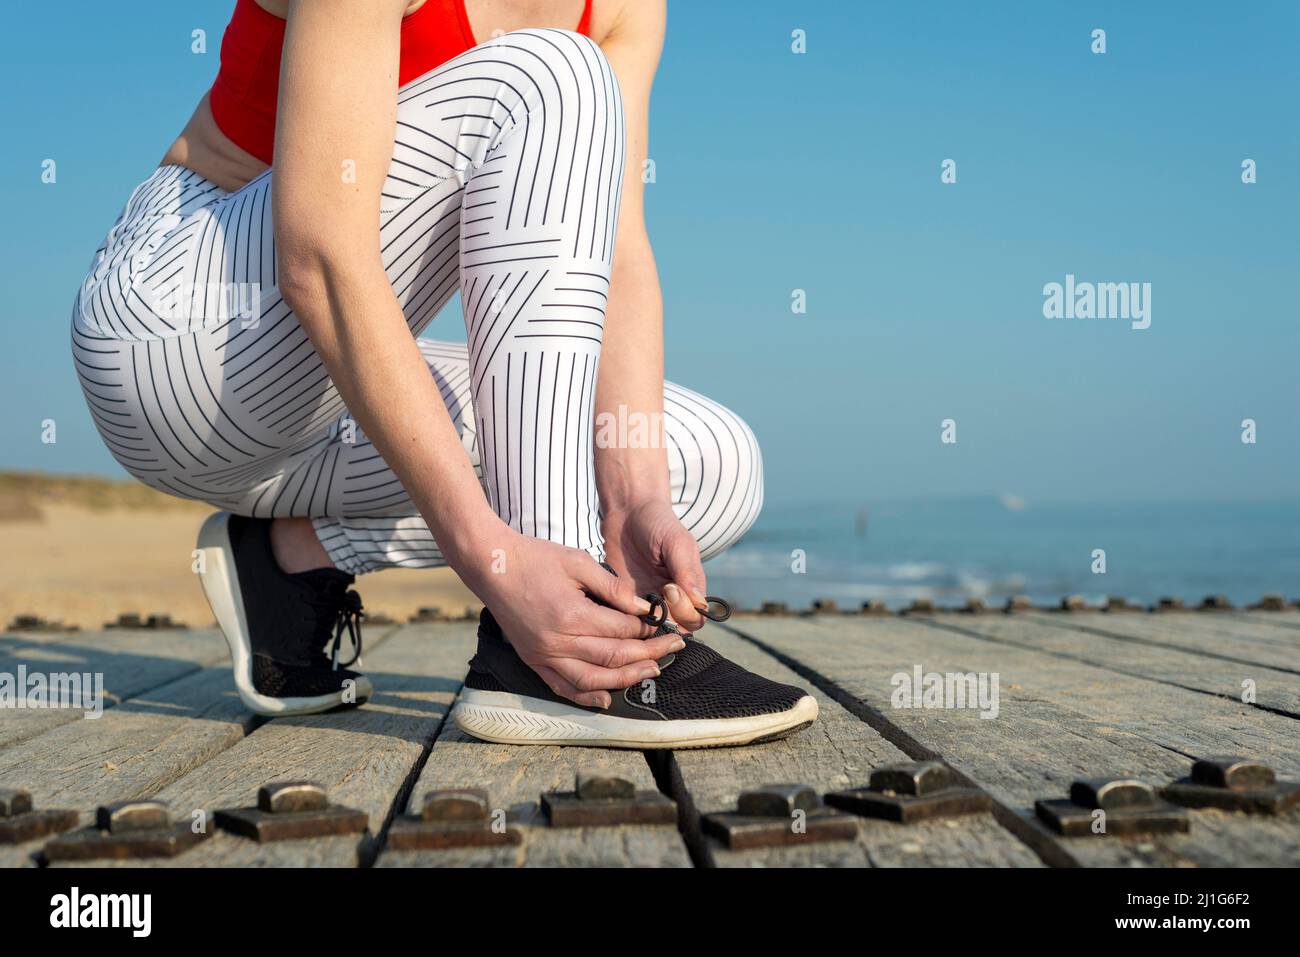 Female runner tying her shoes preparing for a run a jog outside Stock Photo